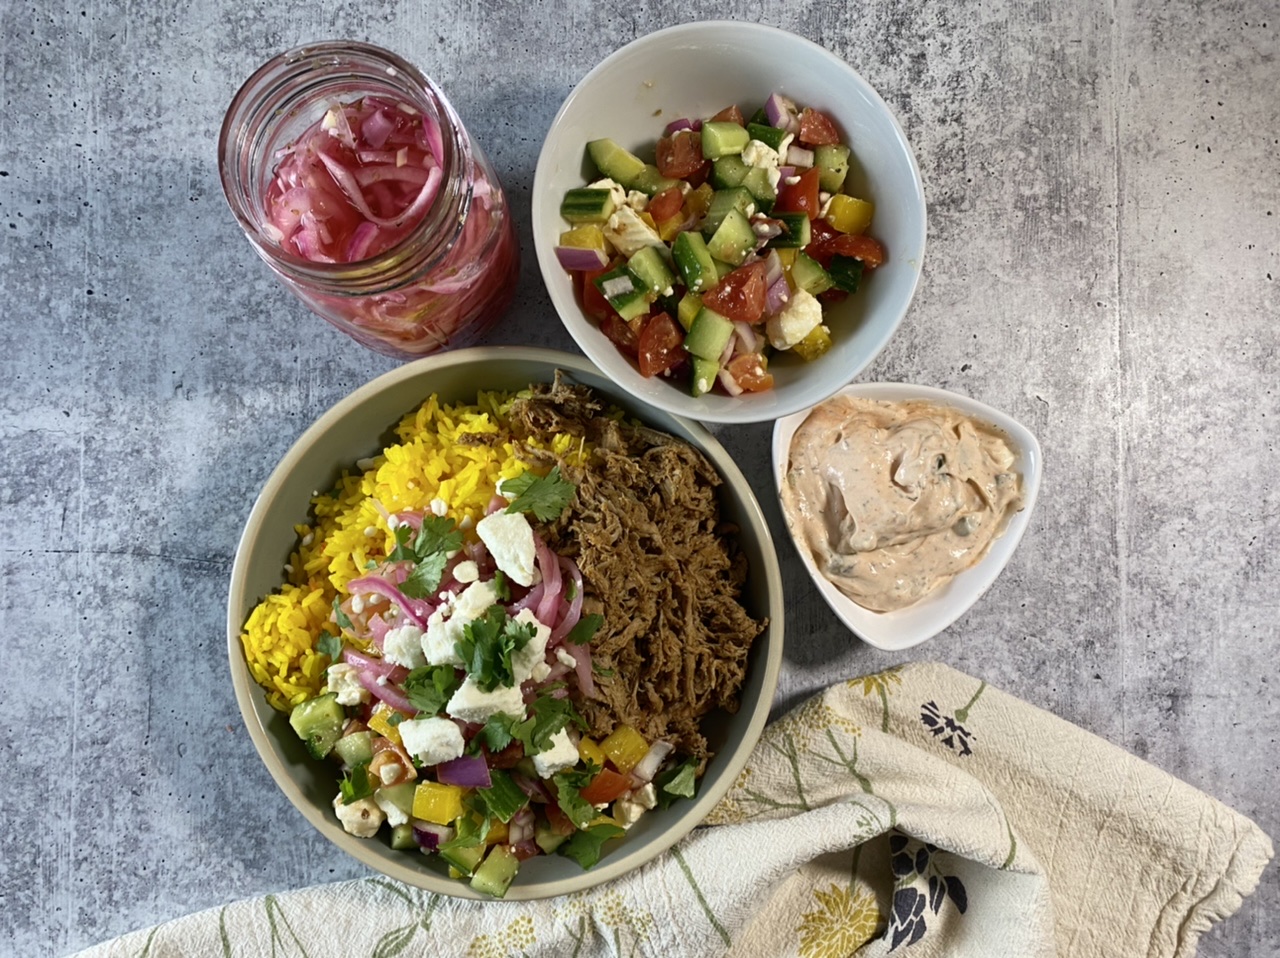 Greek pork gyro and saffron rice bowls next to pickled red onions and Greek salad